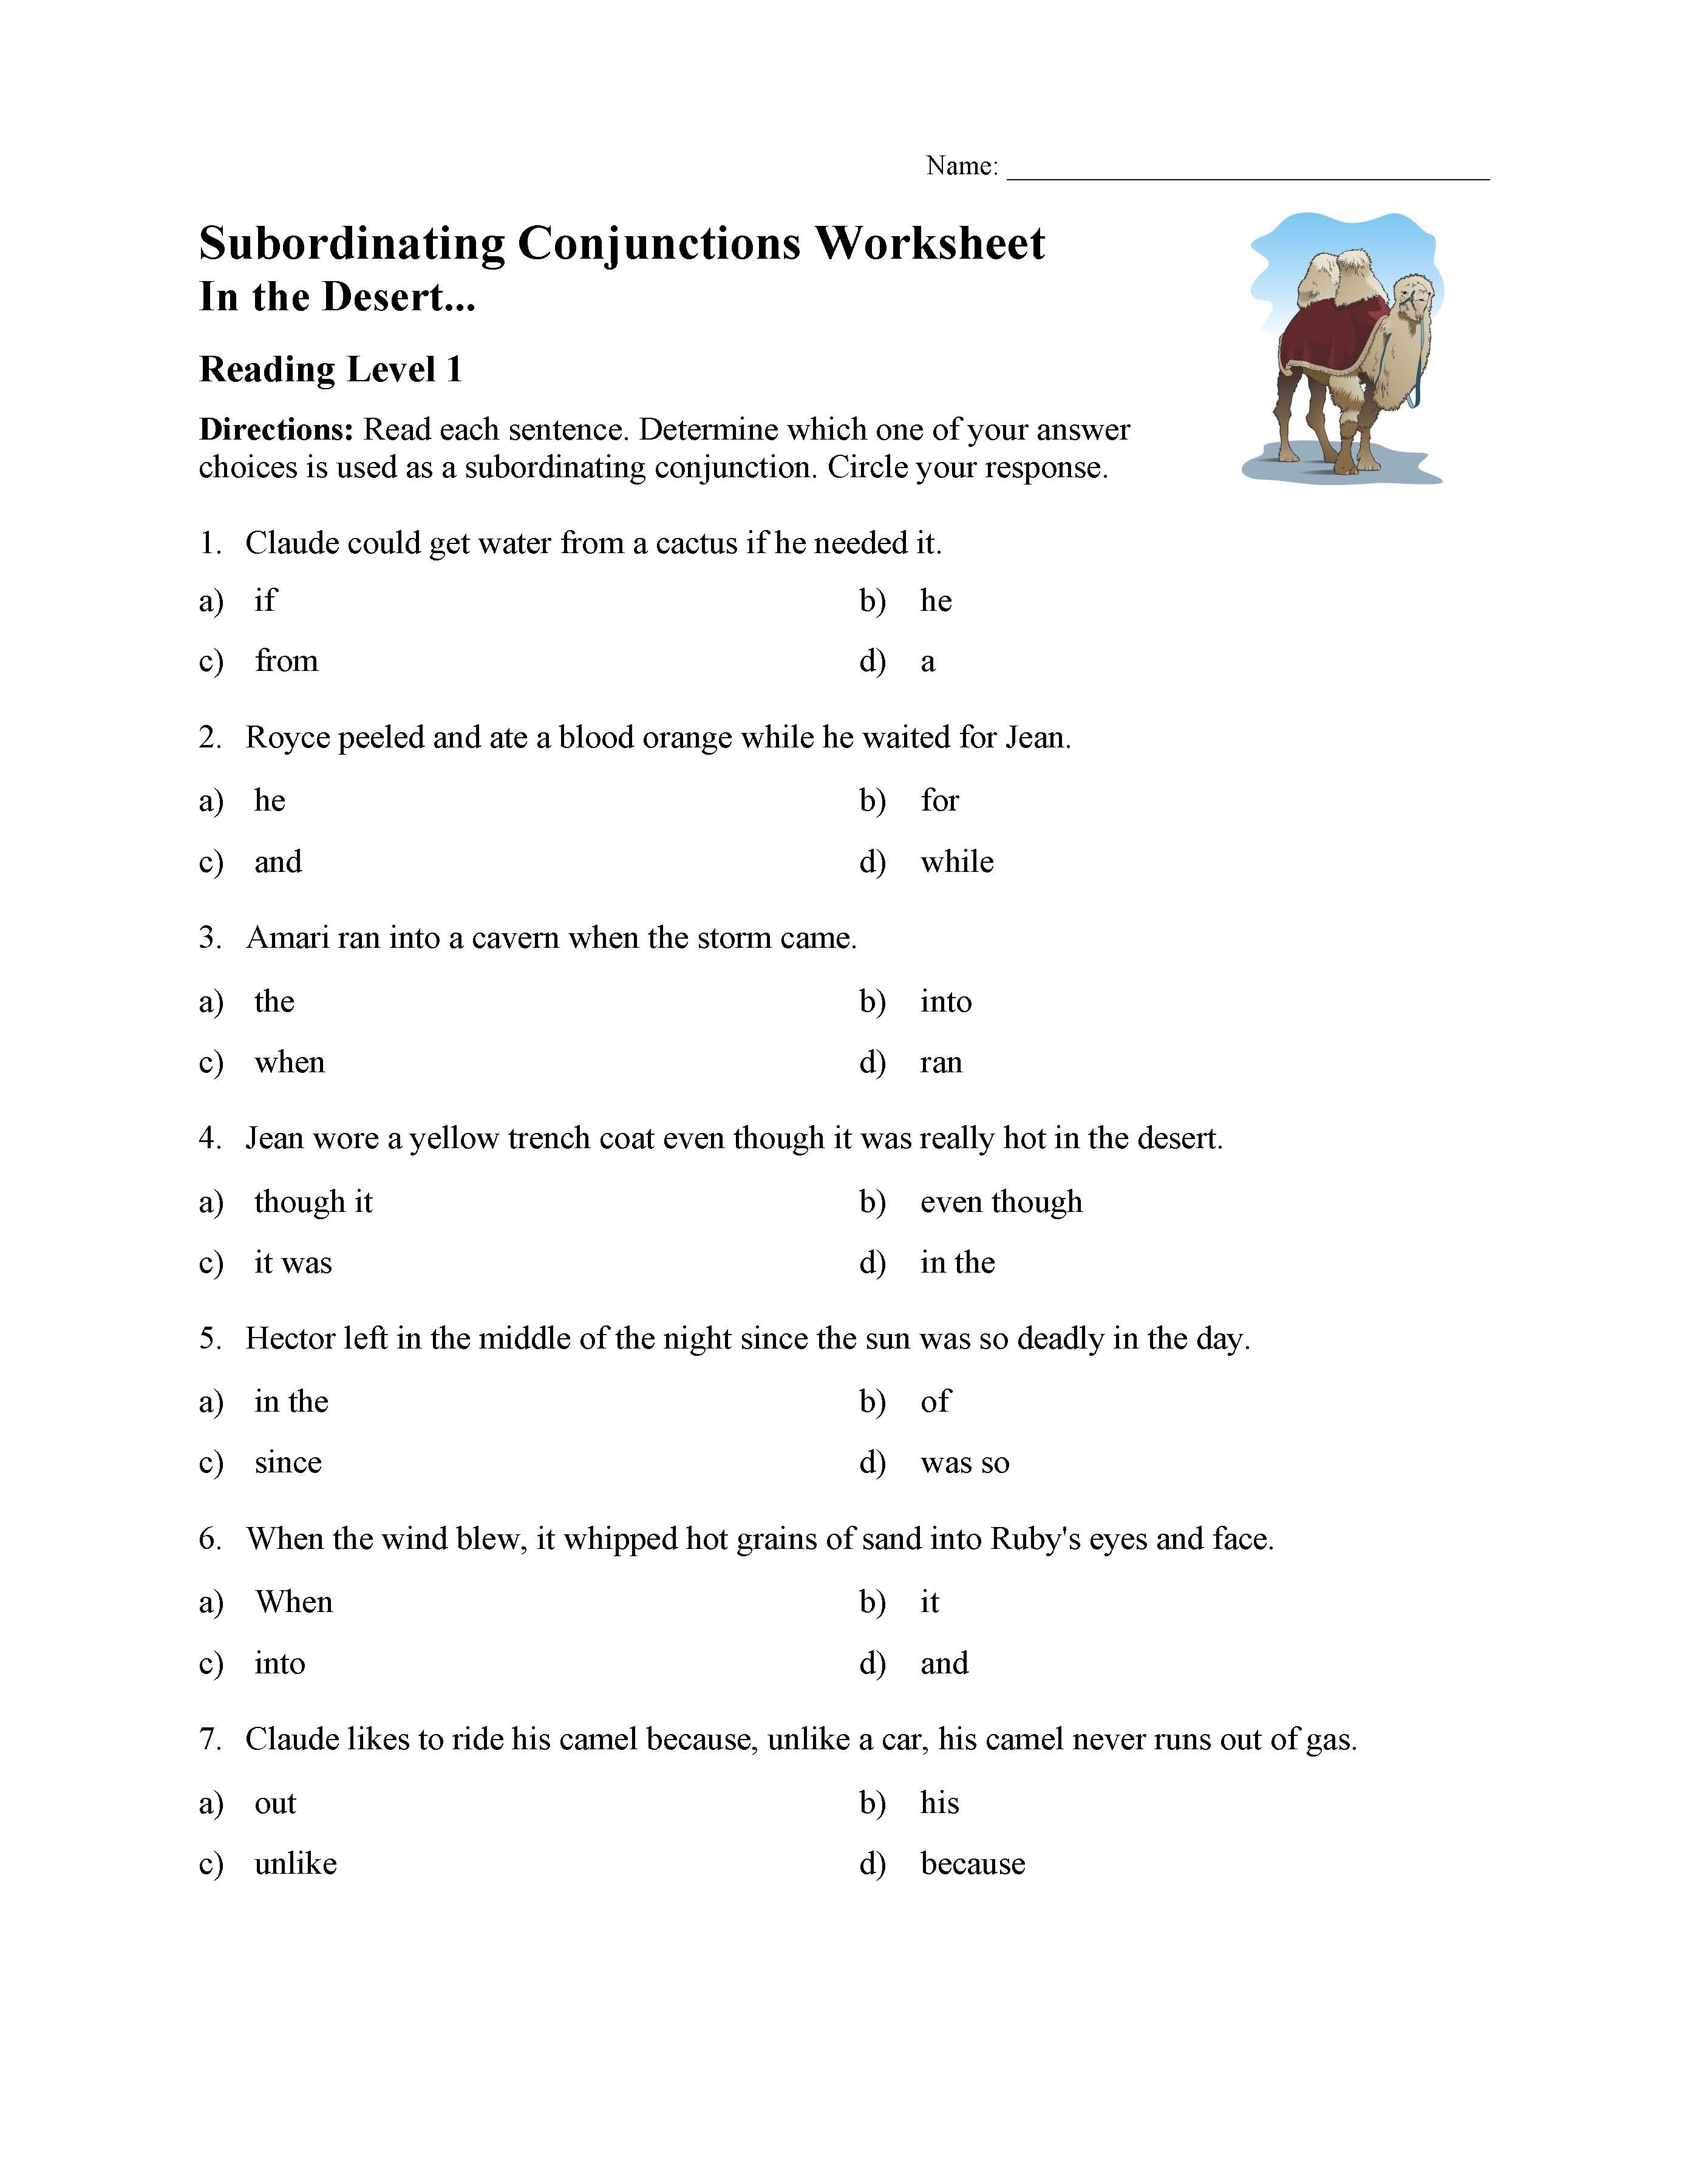 Subordinating Conjunctions Worksheet Reading Level 1 Preview